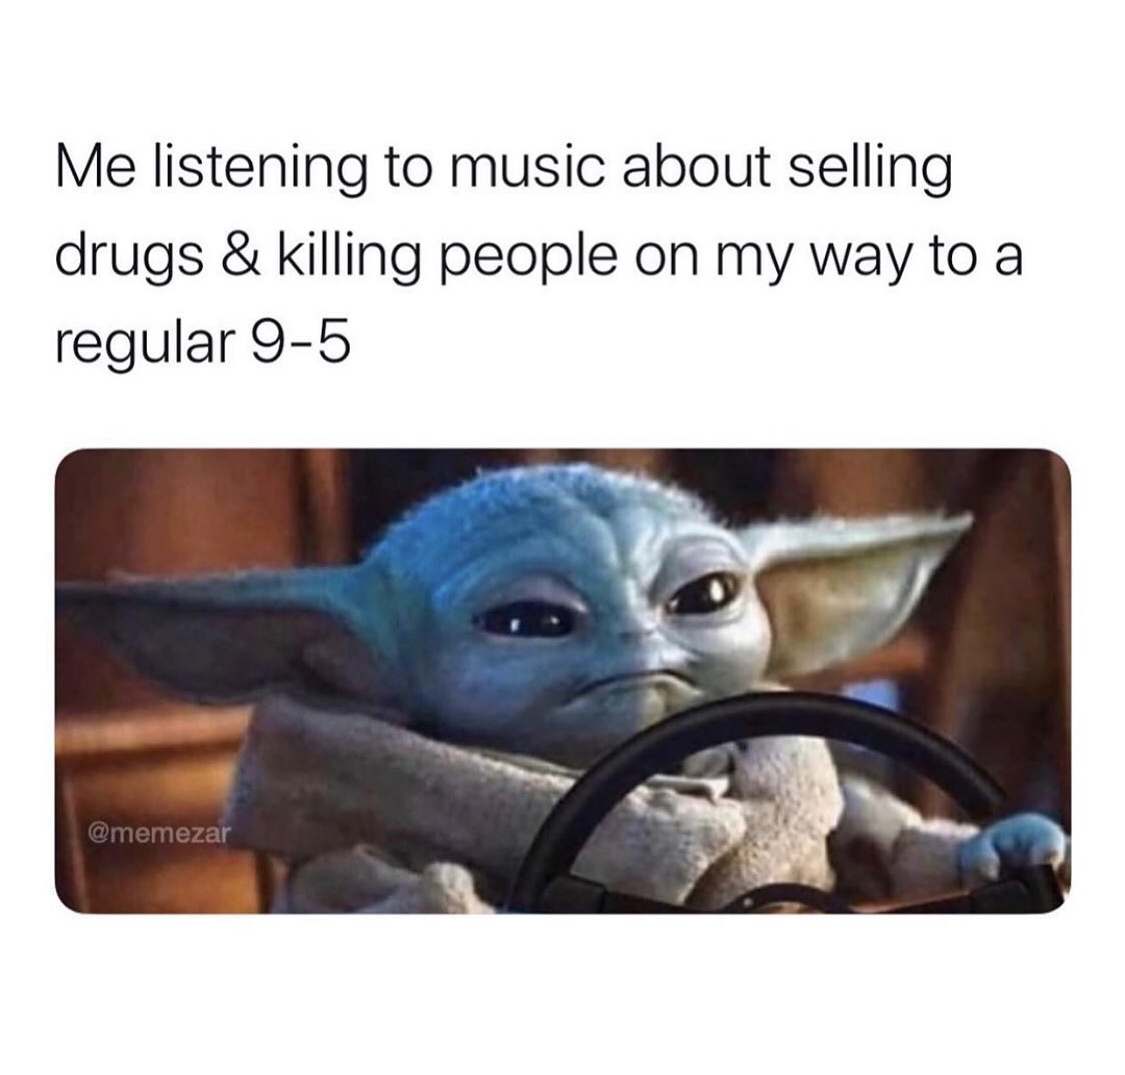 baby yoda zoom zoom lane - Me listening to music about selling drugs & killing people on my way to a regular 95